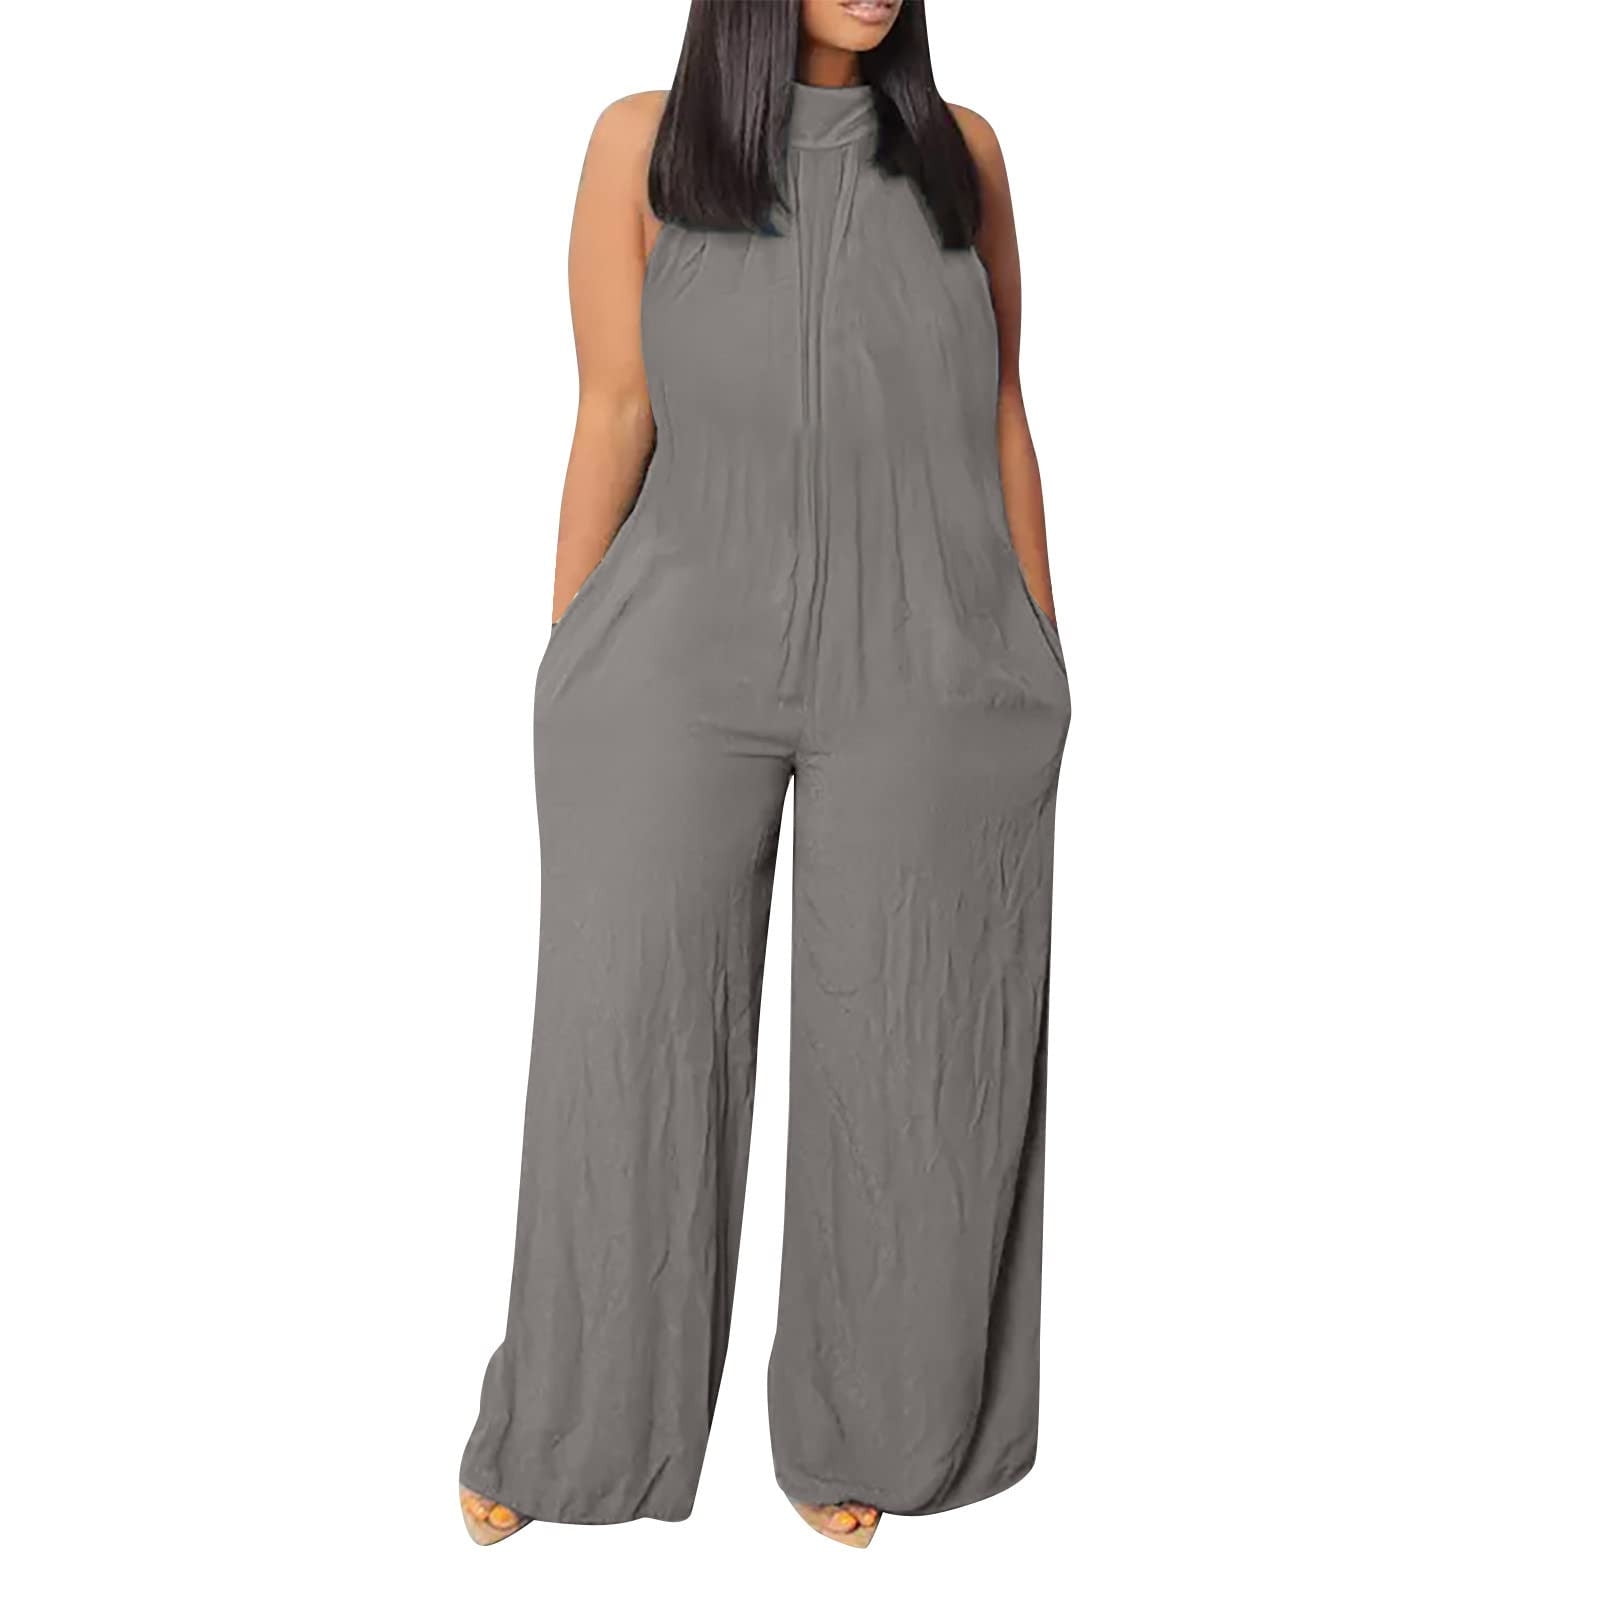 Plus Size Jumpsuits for Women Dressy Linen Wide Leg Jumpsuit Solid Color  Sexy Sleeveless Halter Top Mock Neck Overalls Army Green XXXL 